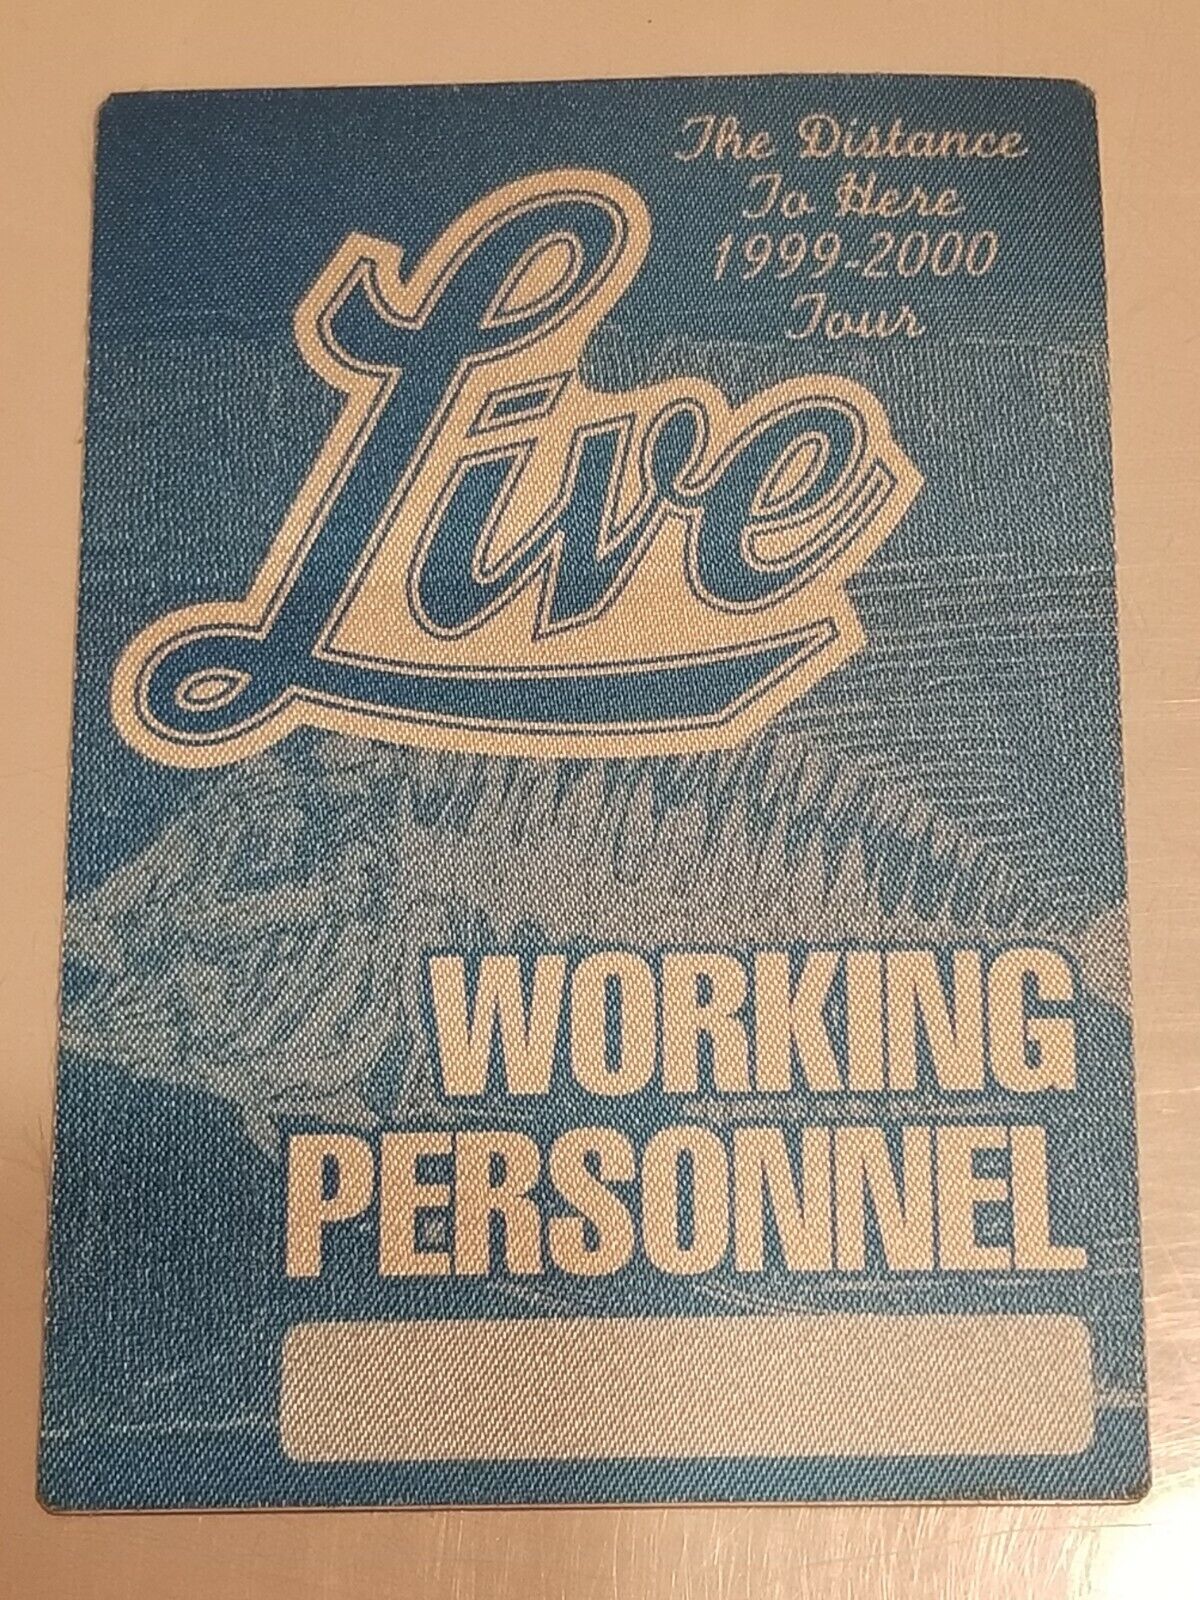 Unused Satin Live Distance To Here 99-2000 Tour Blue Working Pesonnel Pass